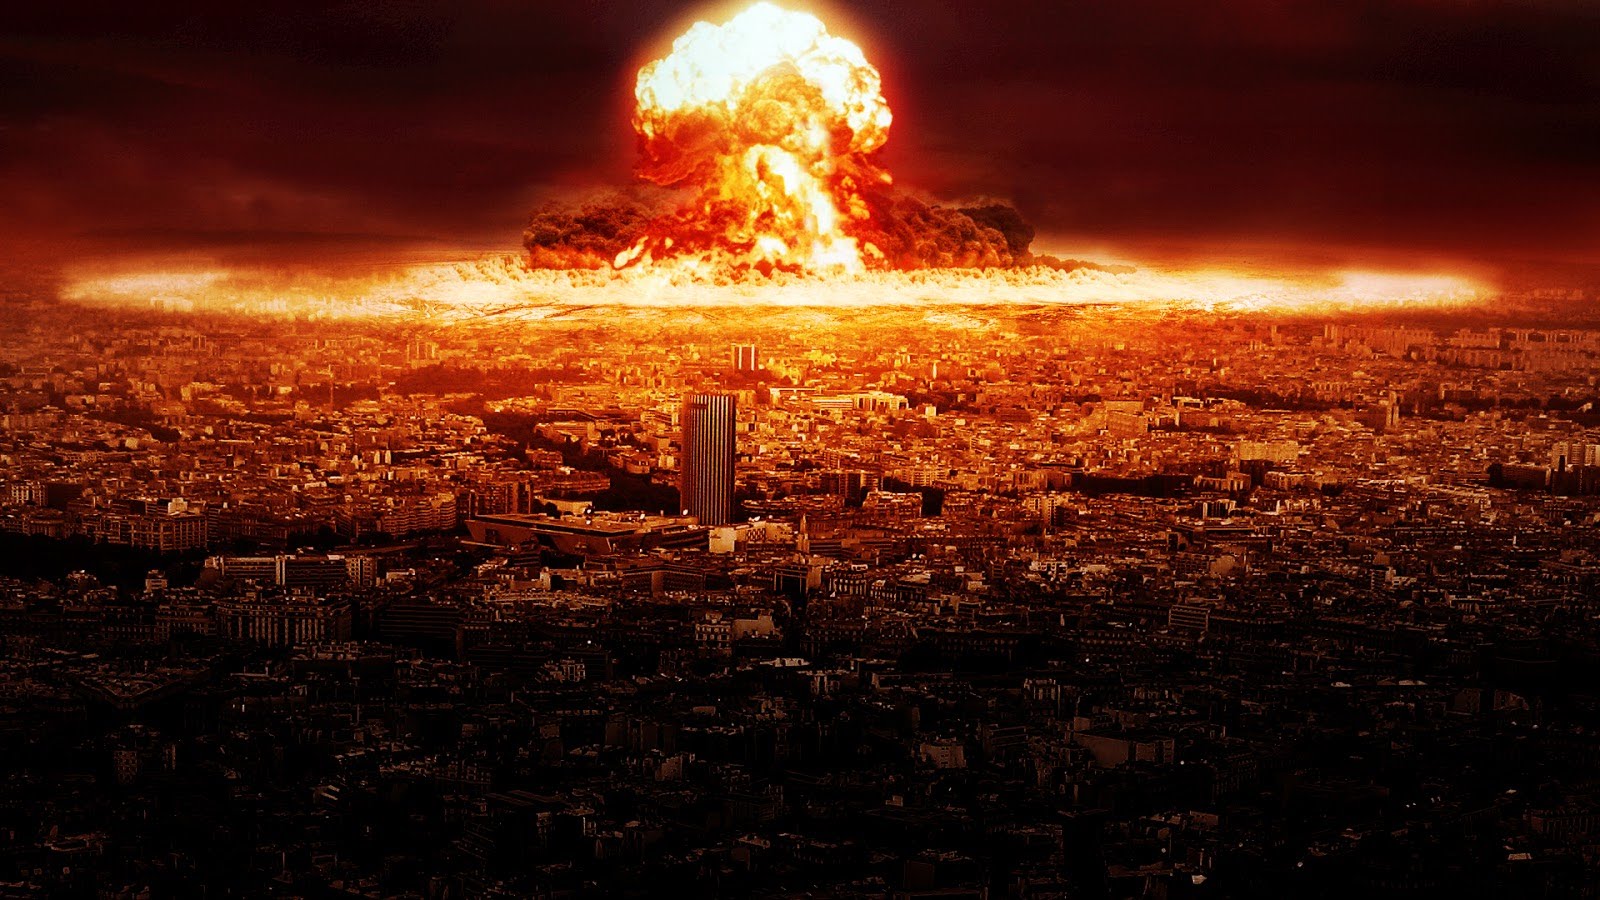 World War 3 : Fort Bragg Troops Told To Prepare For Domestic Nuclear Disaster (Aug 23, 2015)